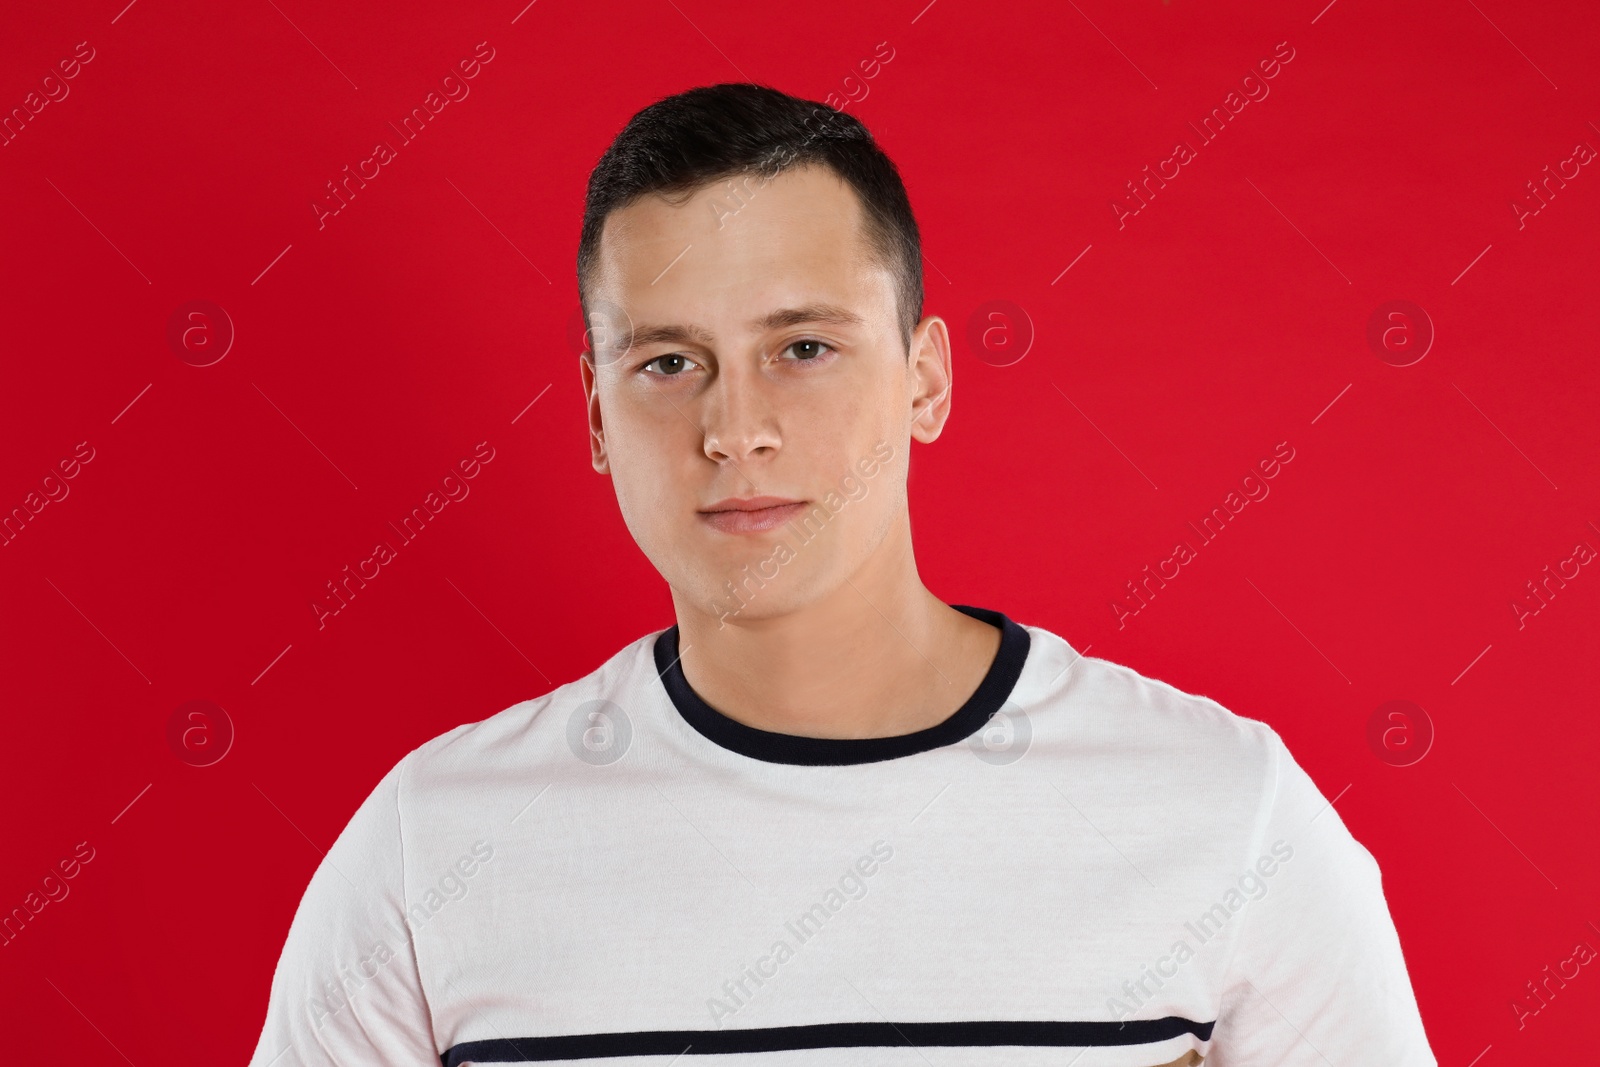 Photo of Handsome young man posing on red background